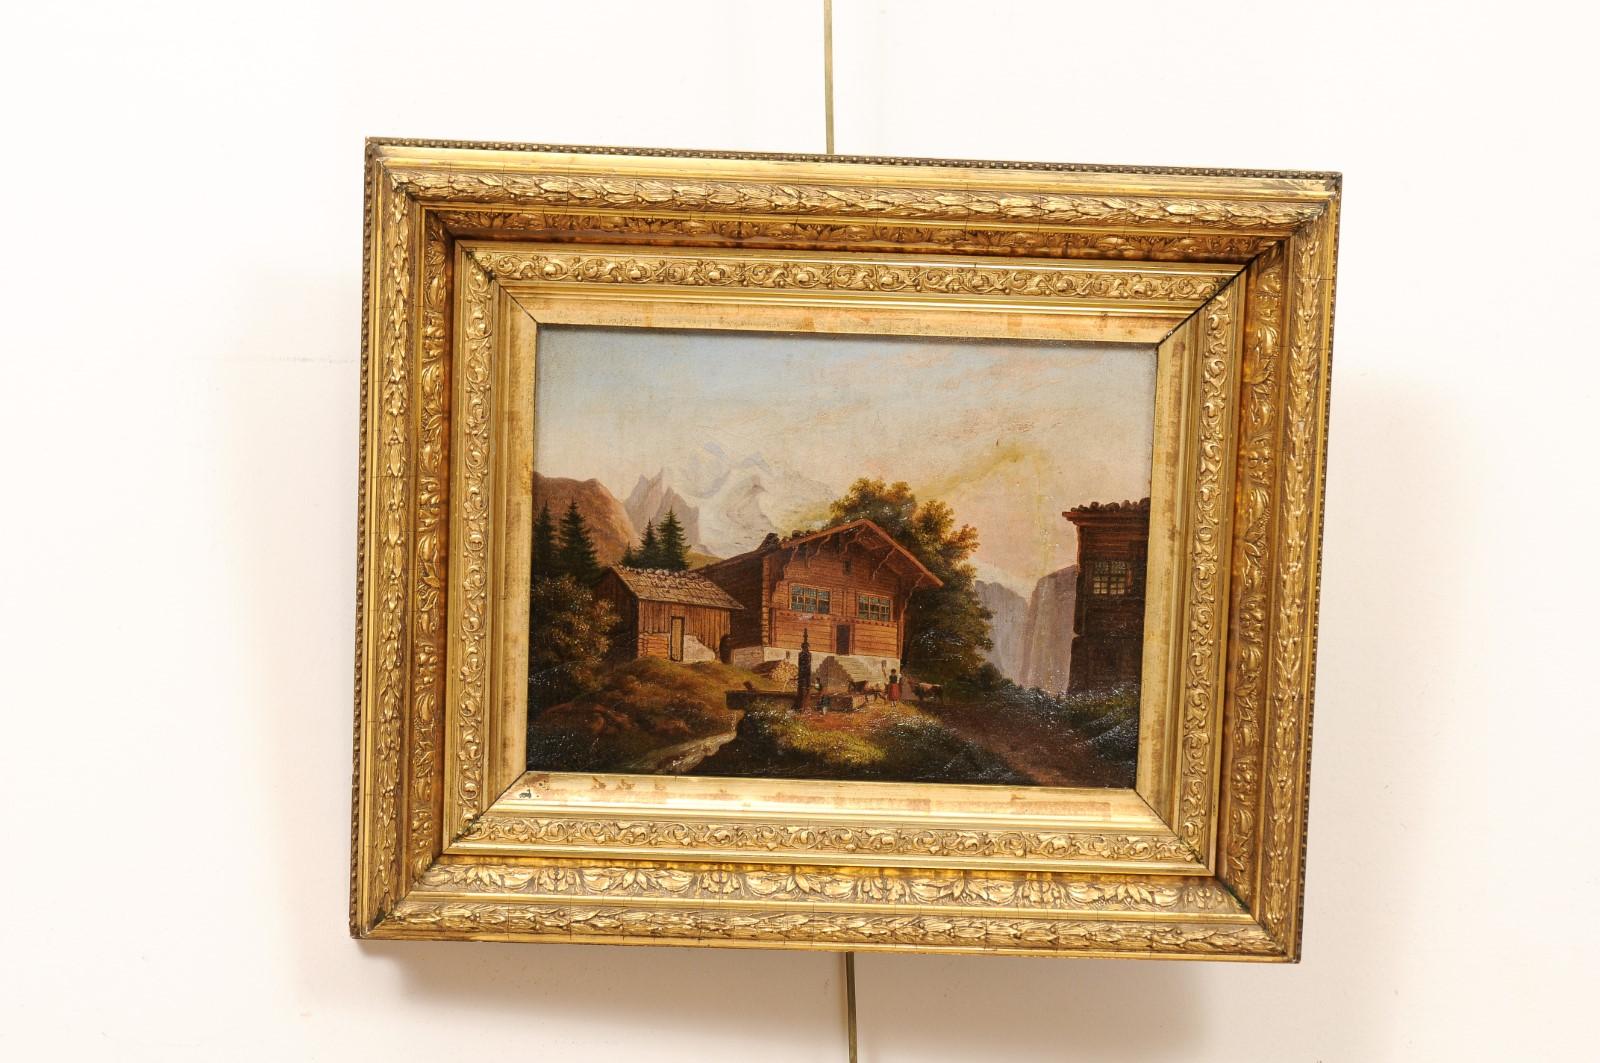  Giltwood Framed Oil on Canvas Painting of Chalet, 19th Century For Sale 1